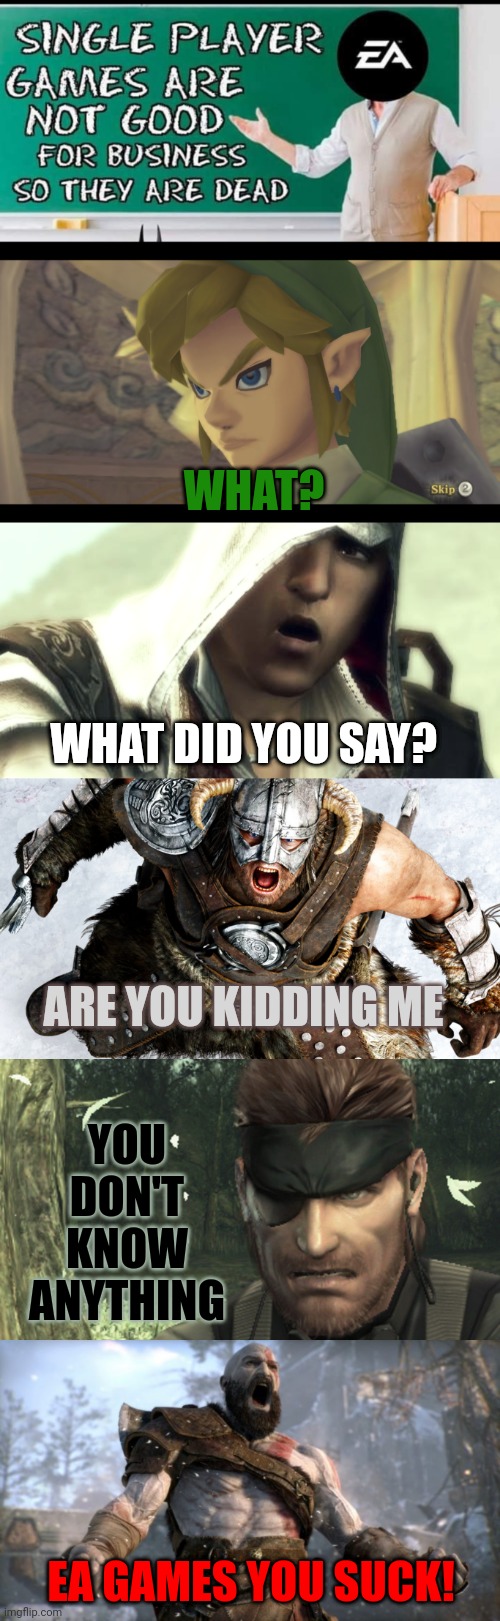 EA IS LOST | WHAT? WHAT DID YOU SAY? ARE YOU KIDDING ME; YOU DON'T KNOW ANYTHING; EA GAMES YOU SUCK! | image tagged in electronic arts,the legend of zelda,skyrim,god of war,assassin's creed,video games | made w/ Imgflip meme maker